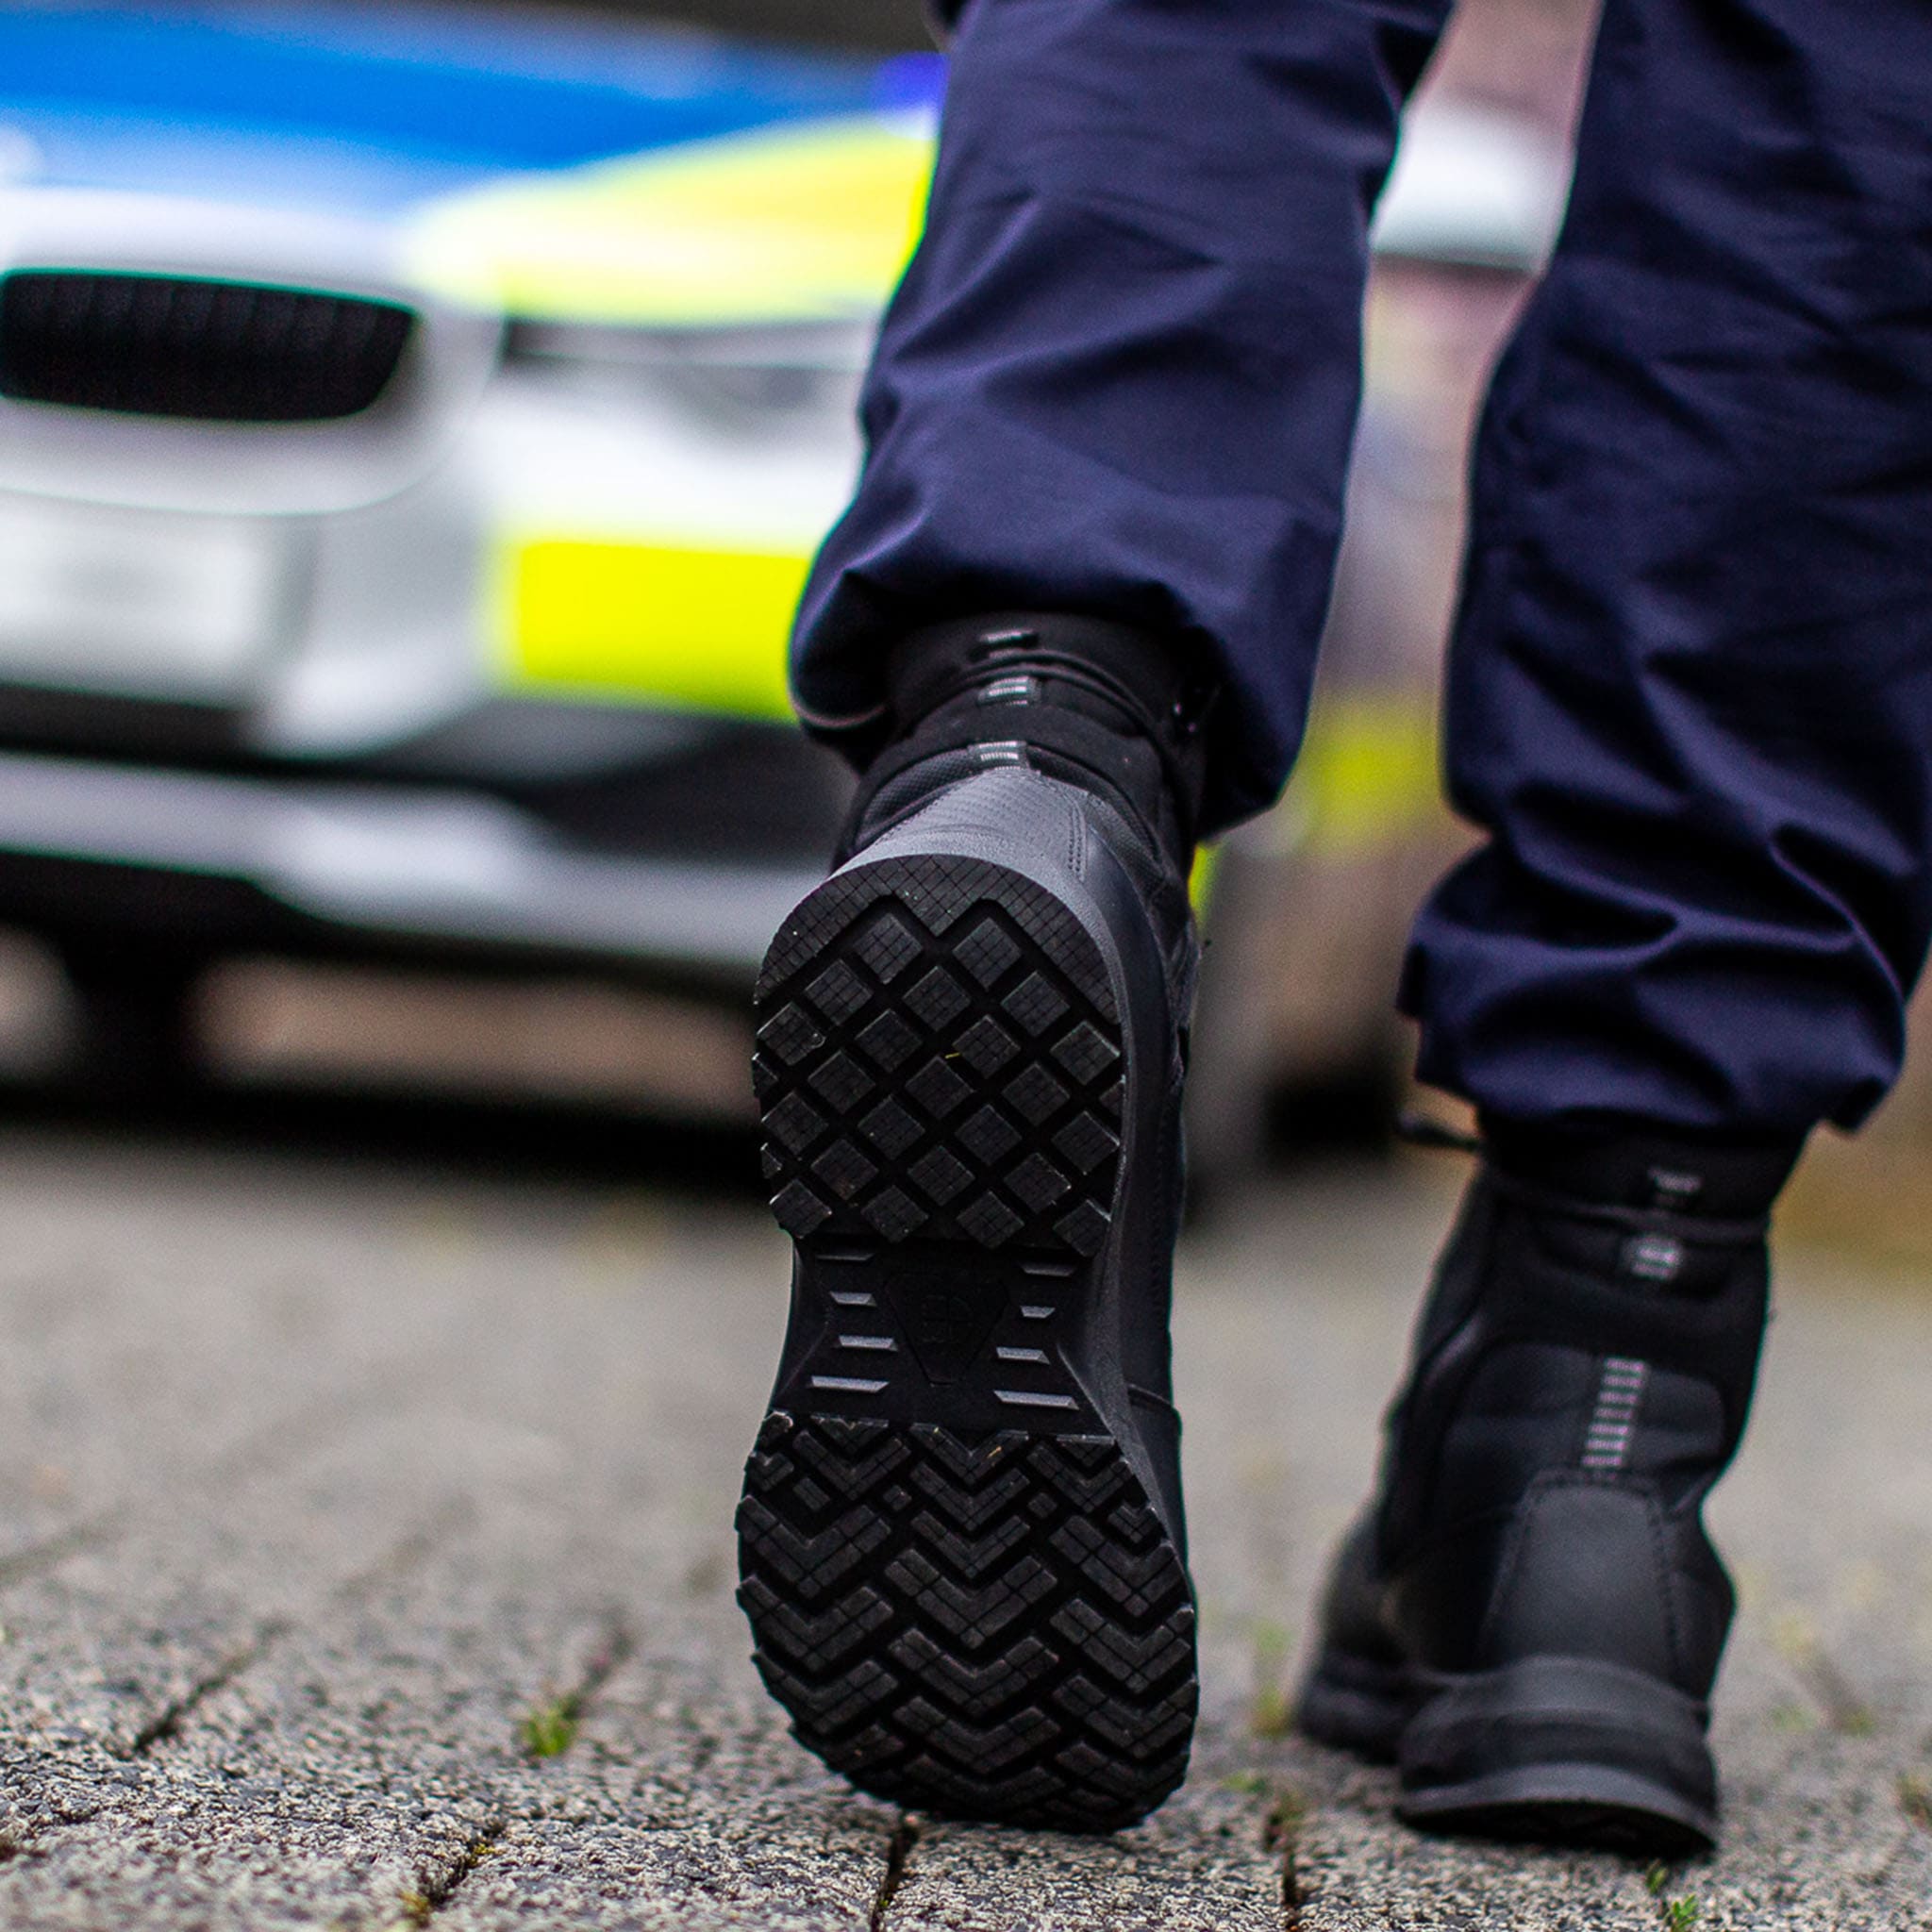 Boots for Police